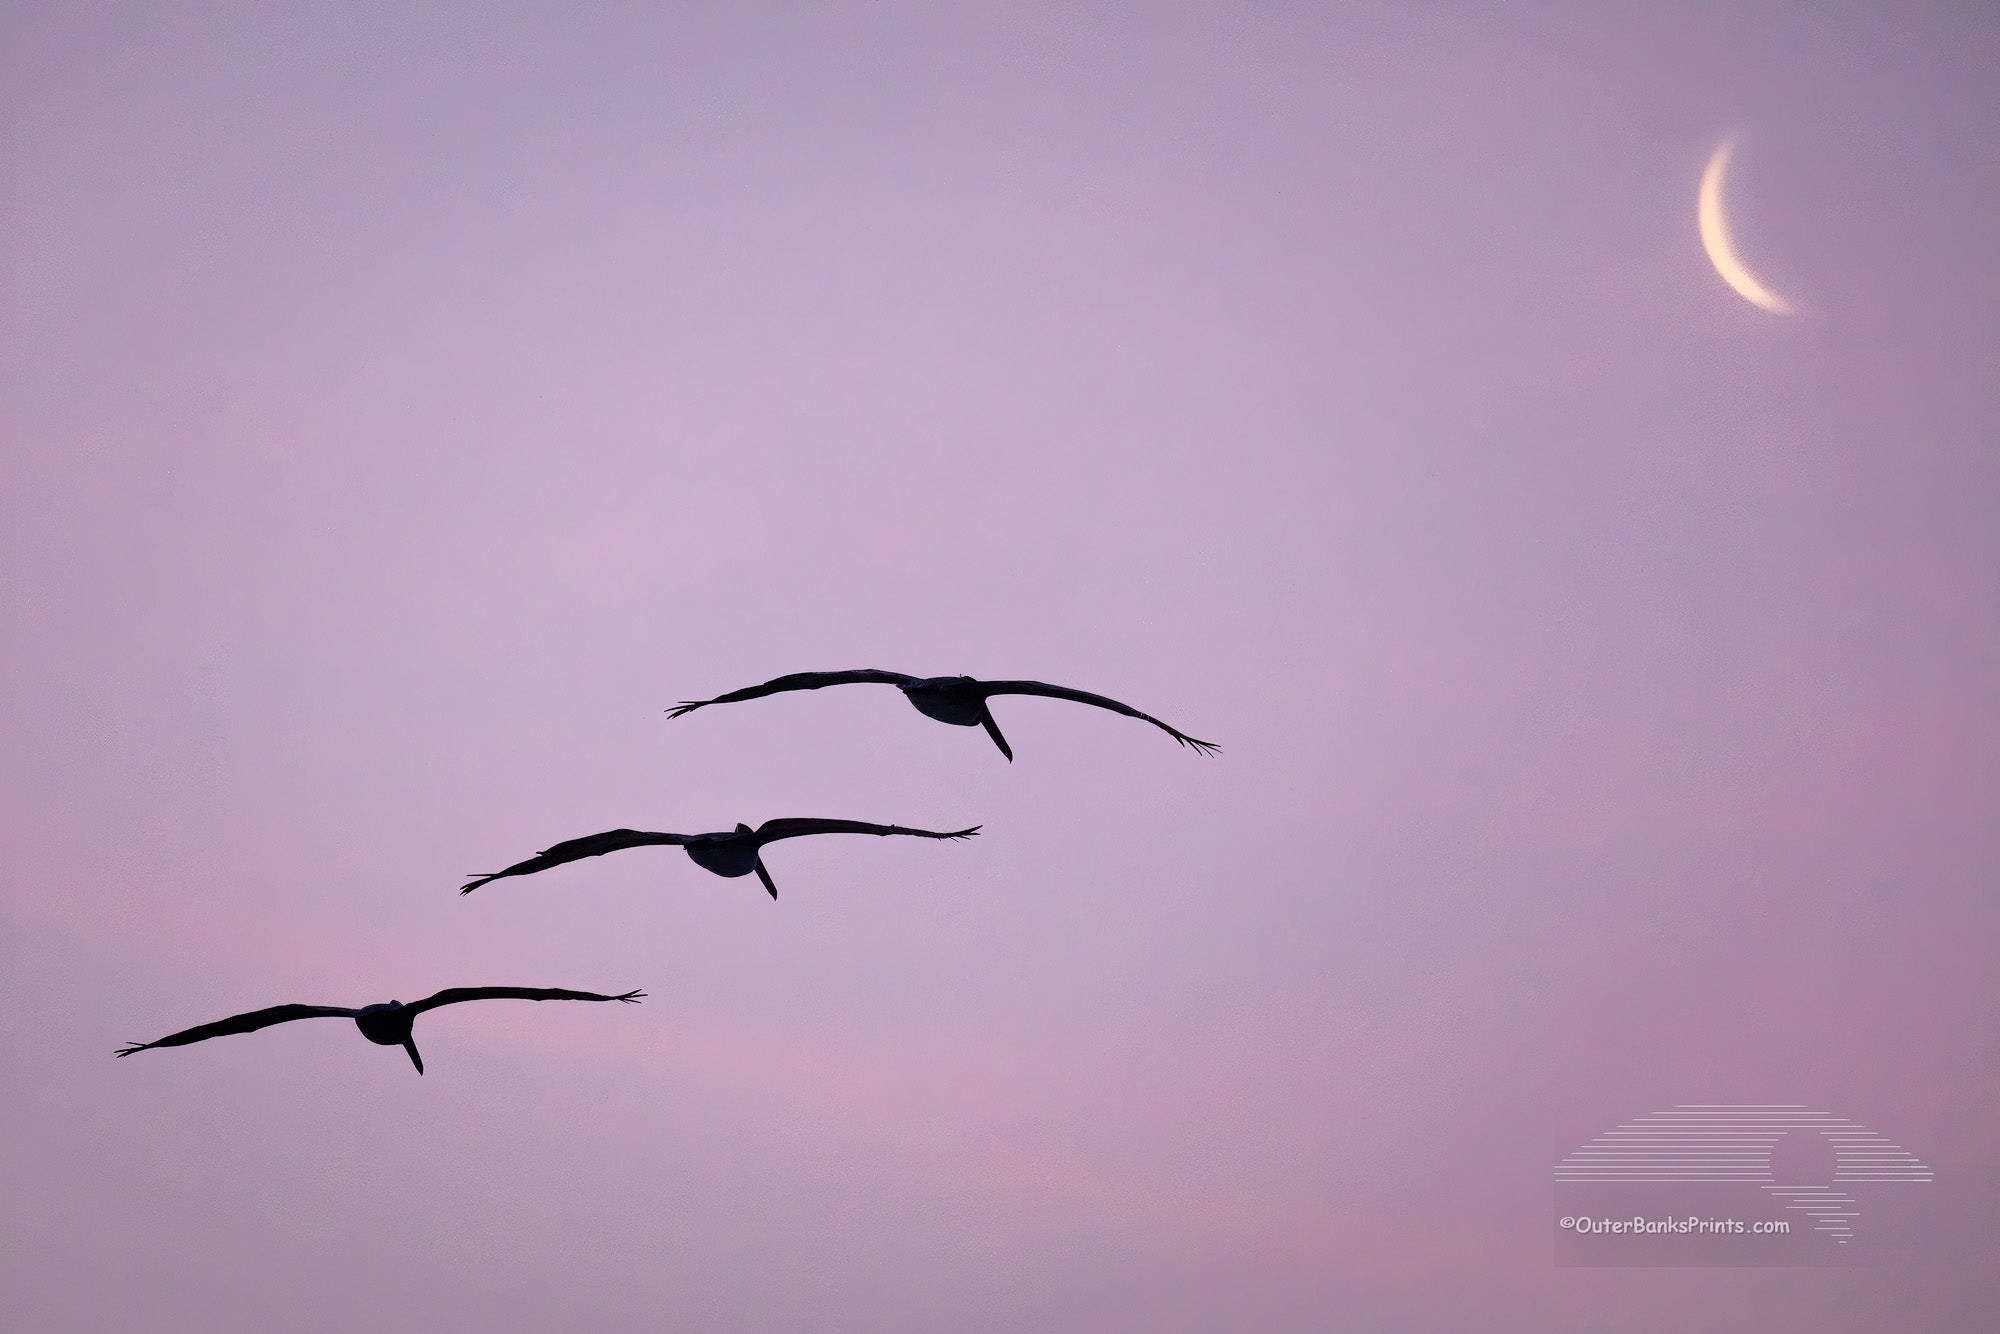 Lucky capture of three pelicans gliding towards the moon sliver at Frisco Beach on Cape Hatteras Island Outer Banks North Carolina.